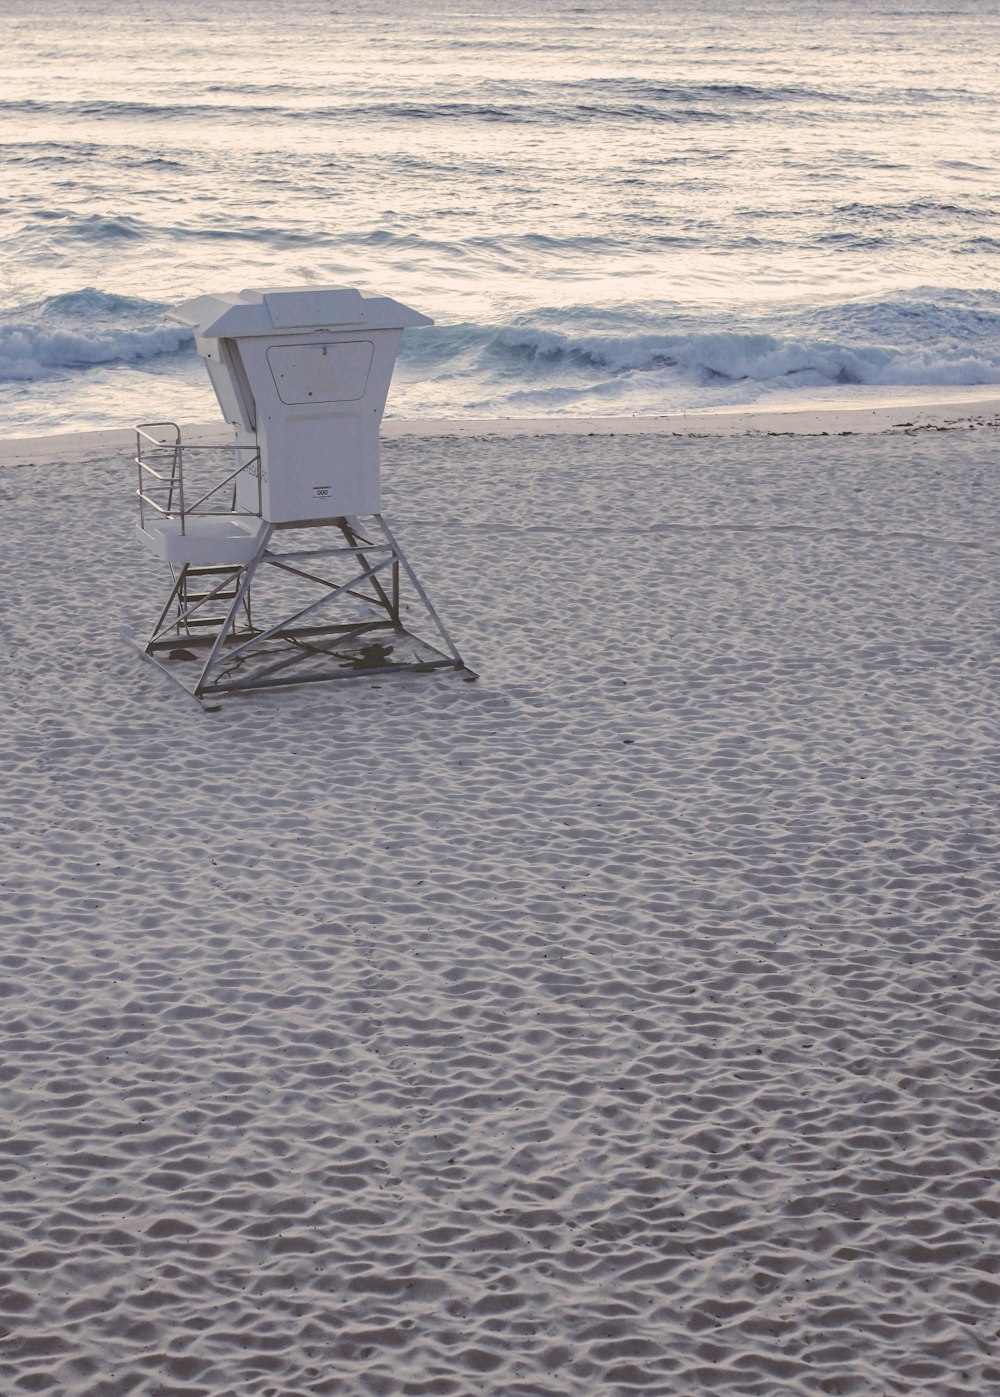 white and gray lifeguard chair on beach shore during daytime